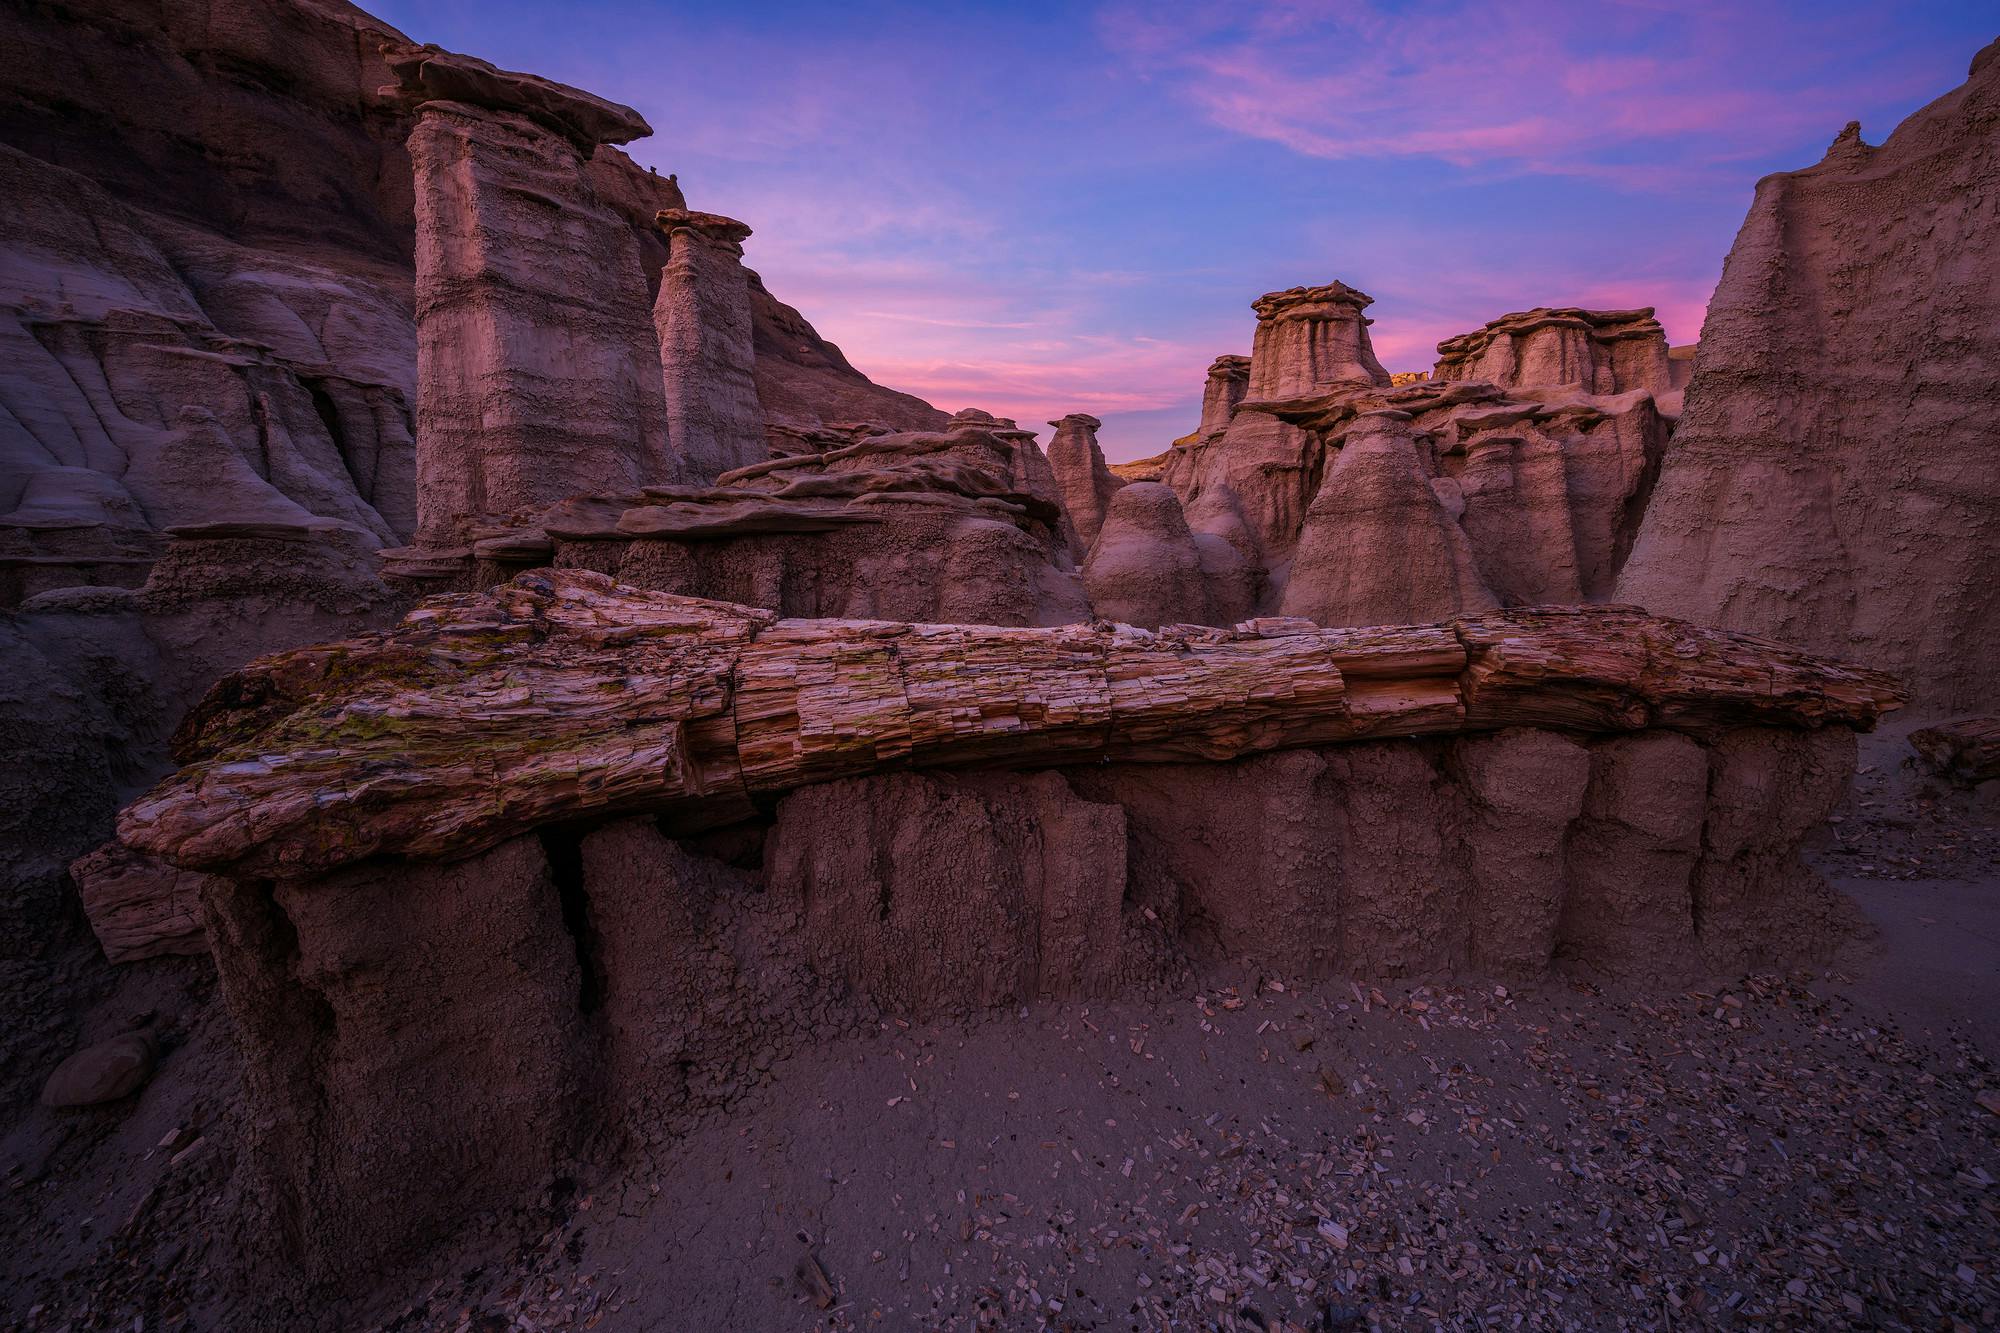 Petrified Tree and Hoodoos at Sunset in Bisti